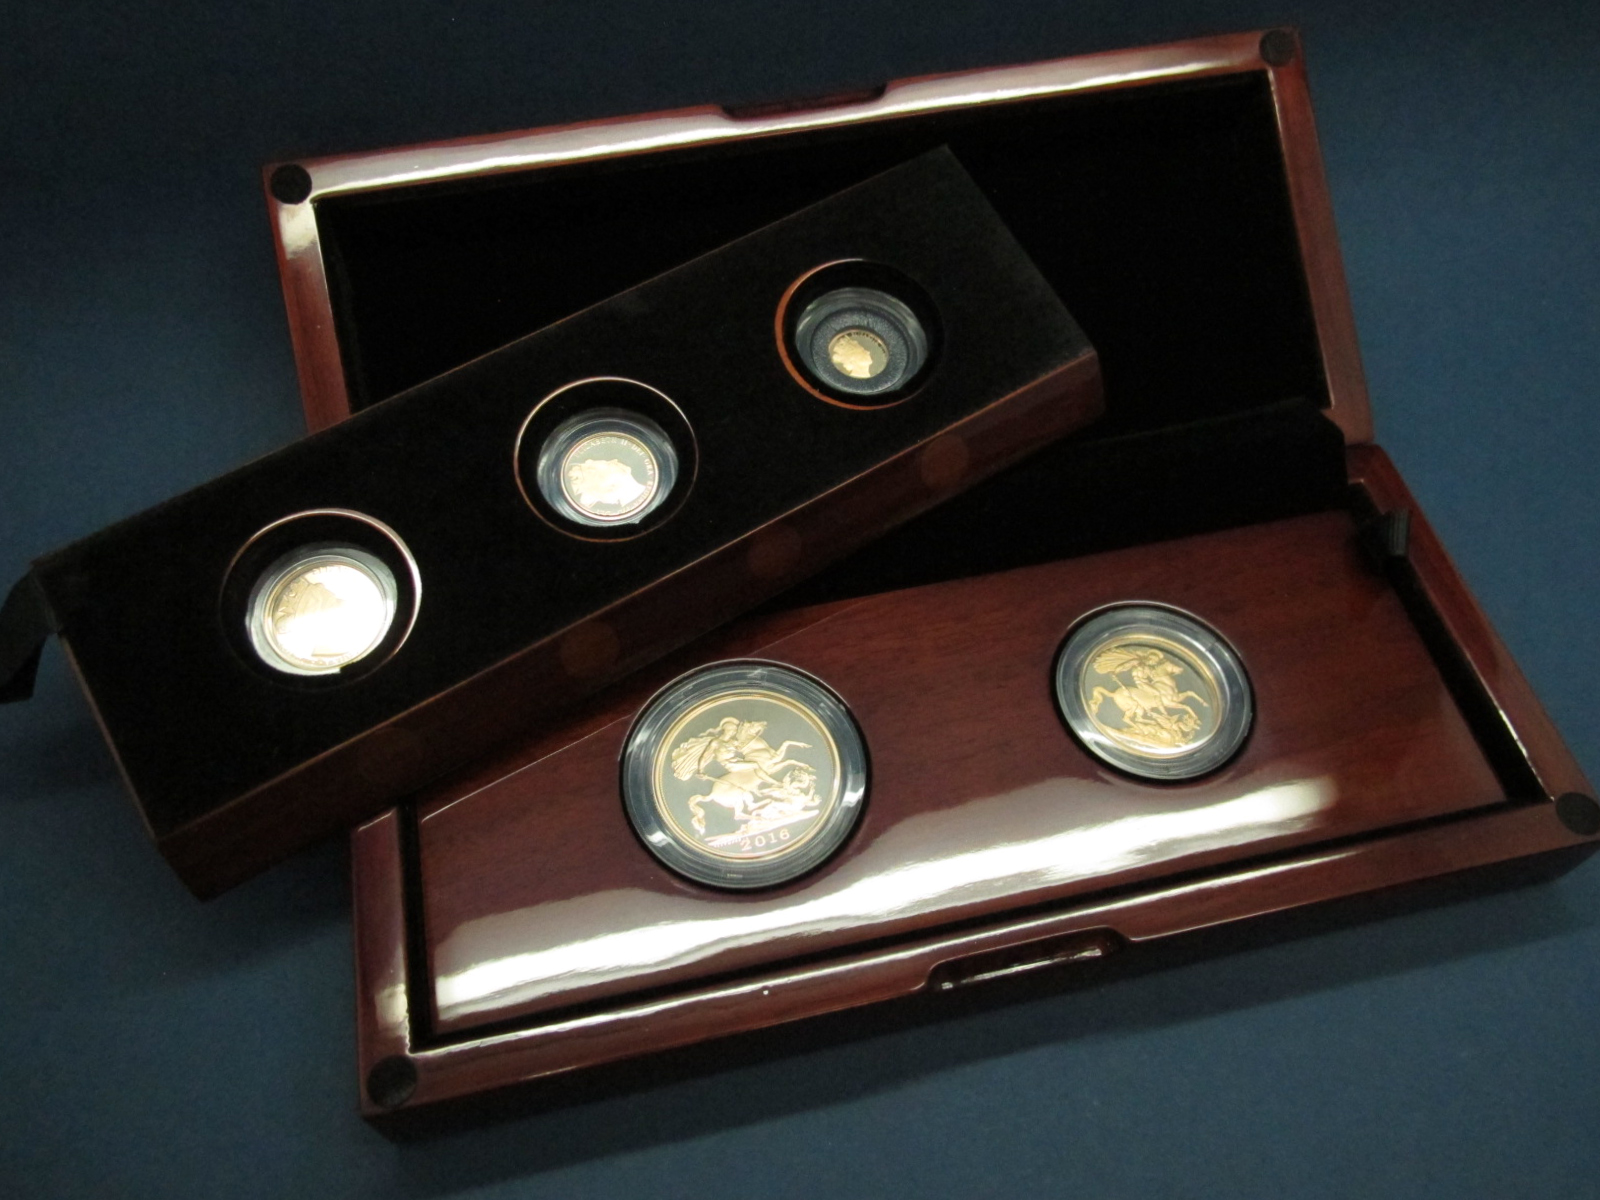 The Royal Mint, The Sovereign 2016 Five Coin Set, Gold Proof Coin Set, comprising of Five